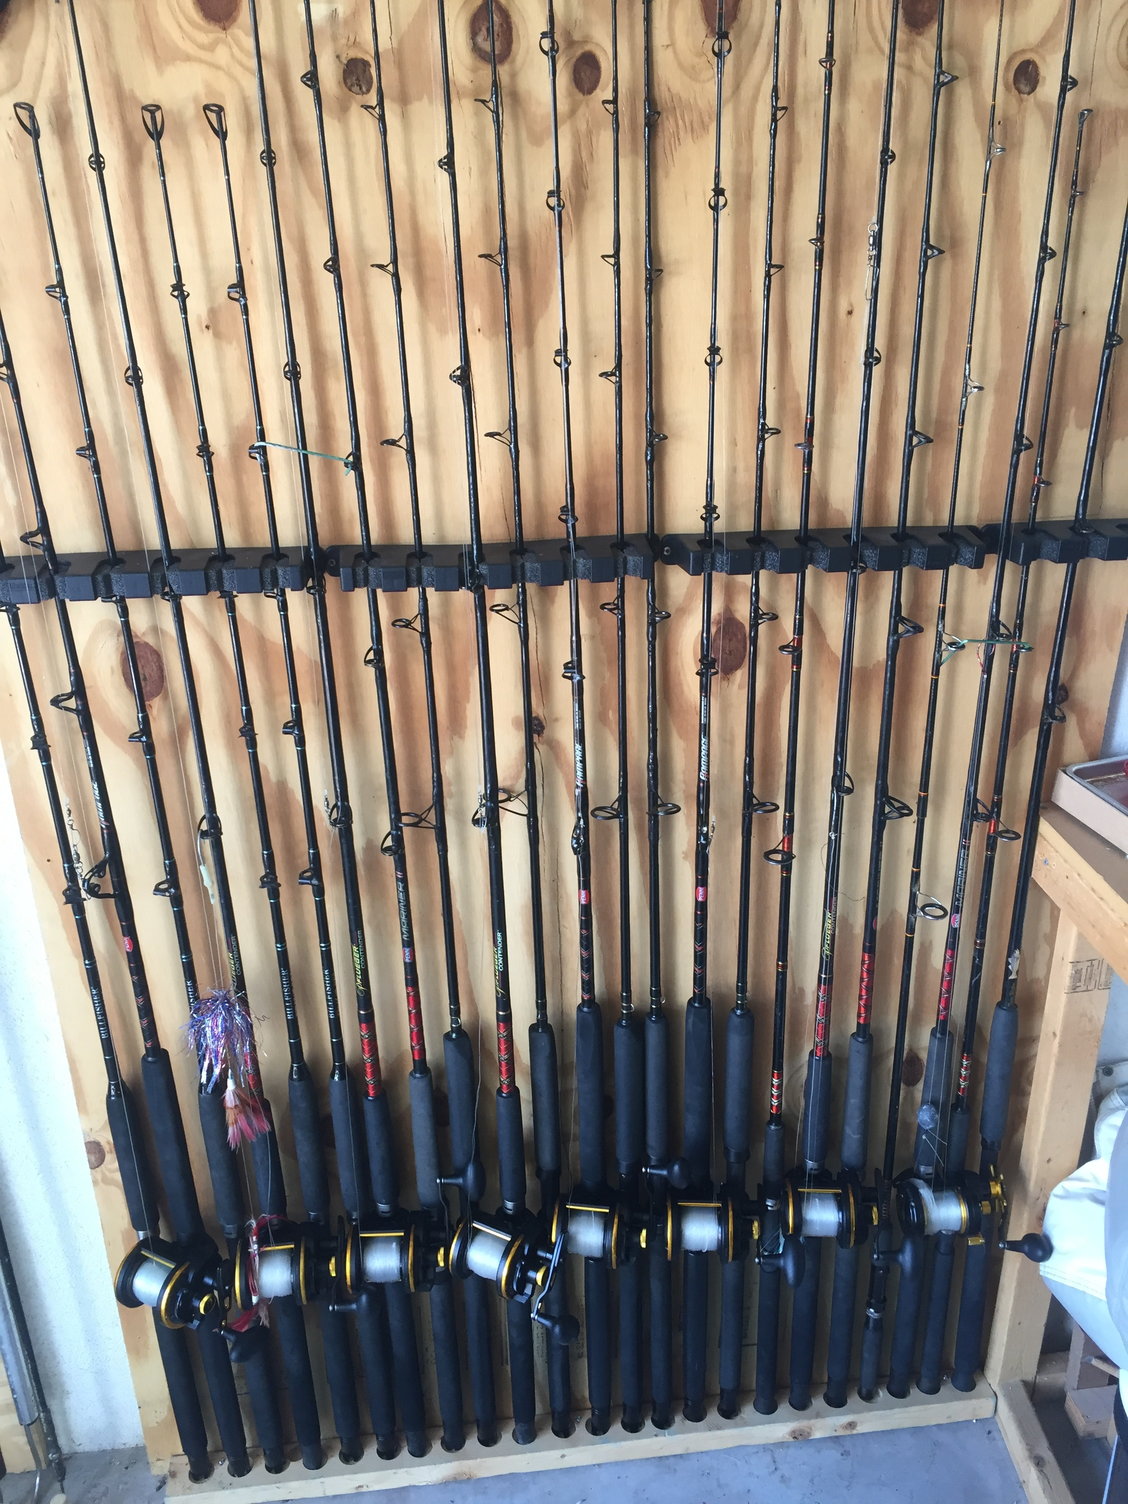 Show me your rod storage ideas!! - The Hull Truth - Boating and